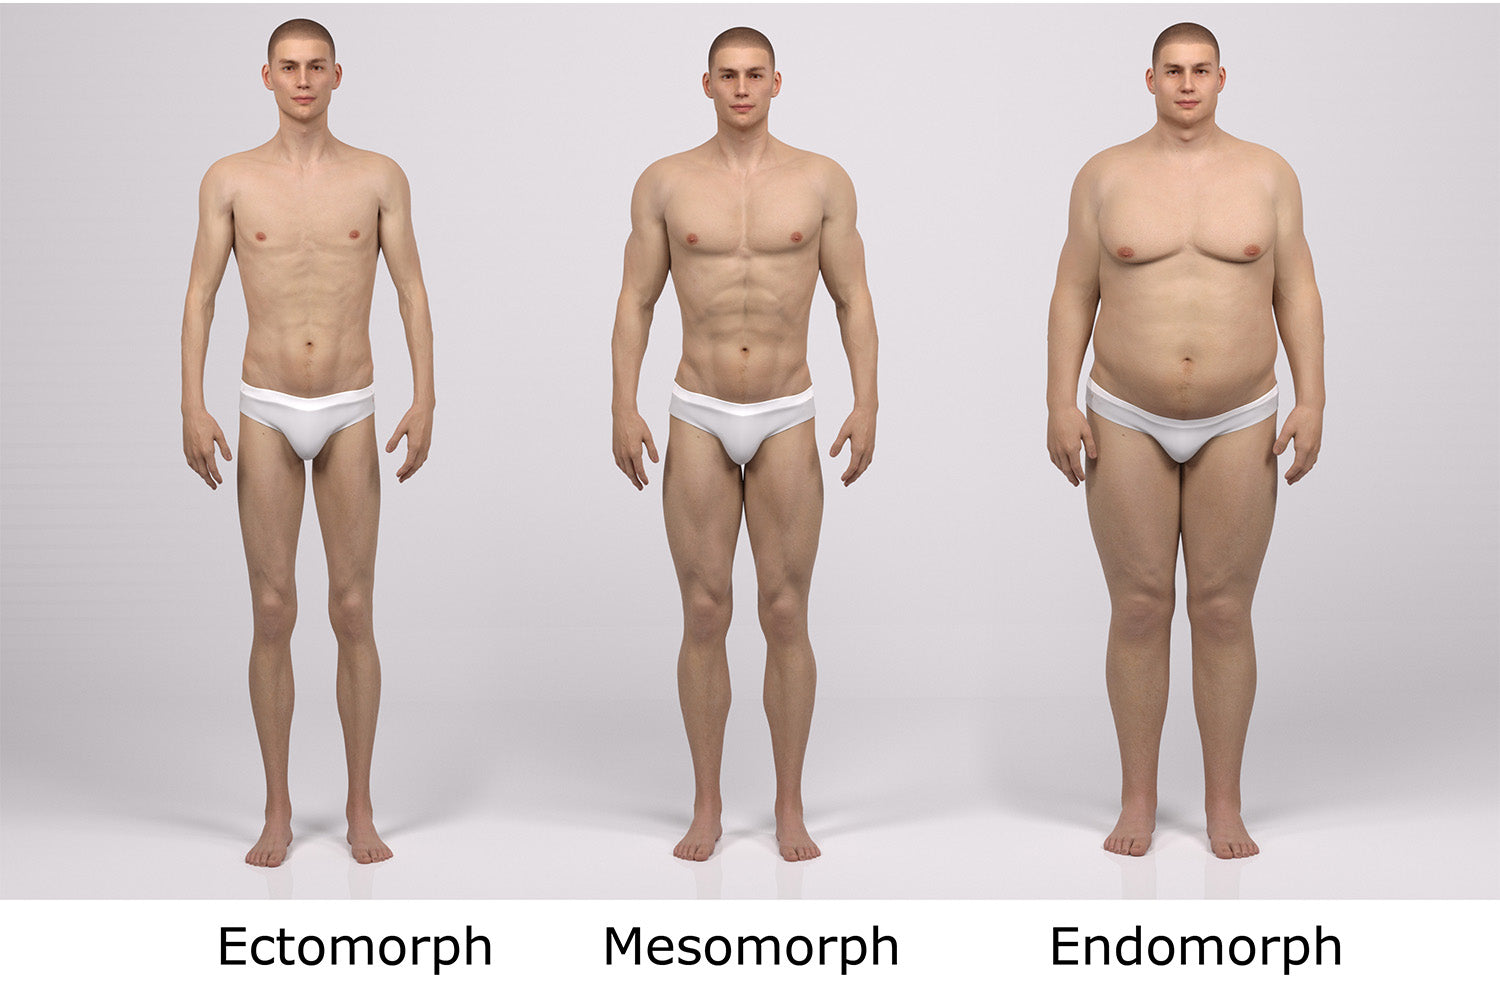 How To Train For A Mesomorph Body Type